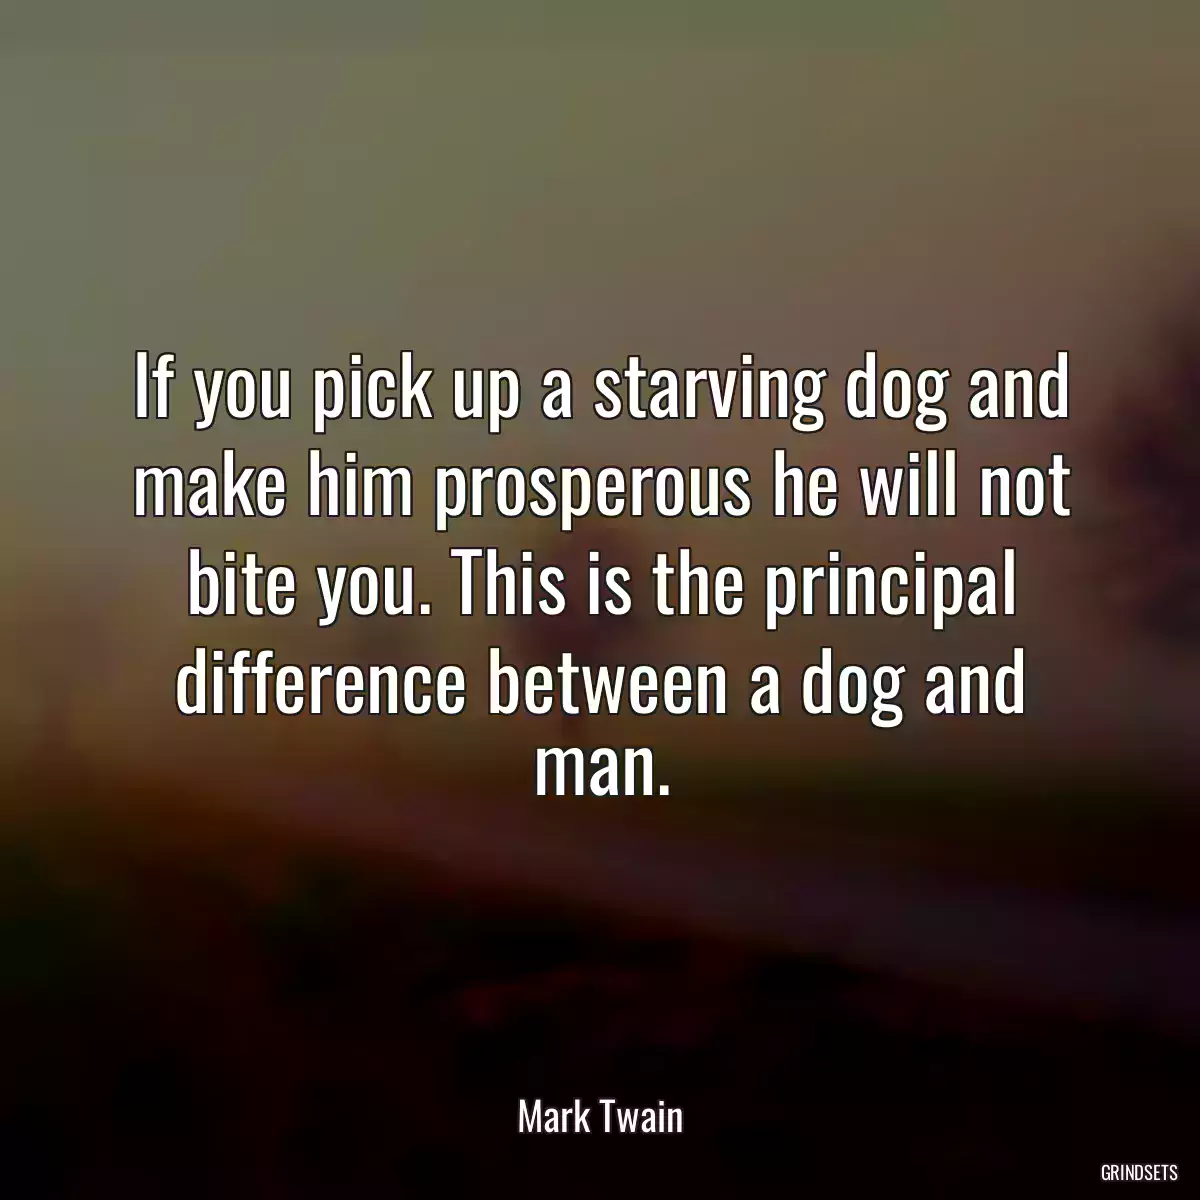 If you pick up a starving dog and make him prosperous he will not bite you. This is the principal difference between a dog and man.